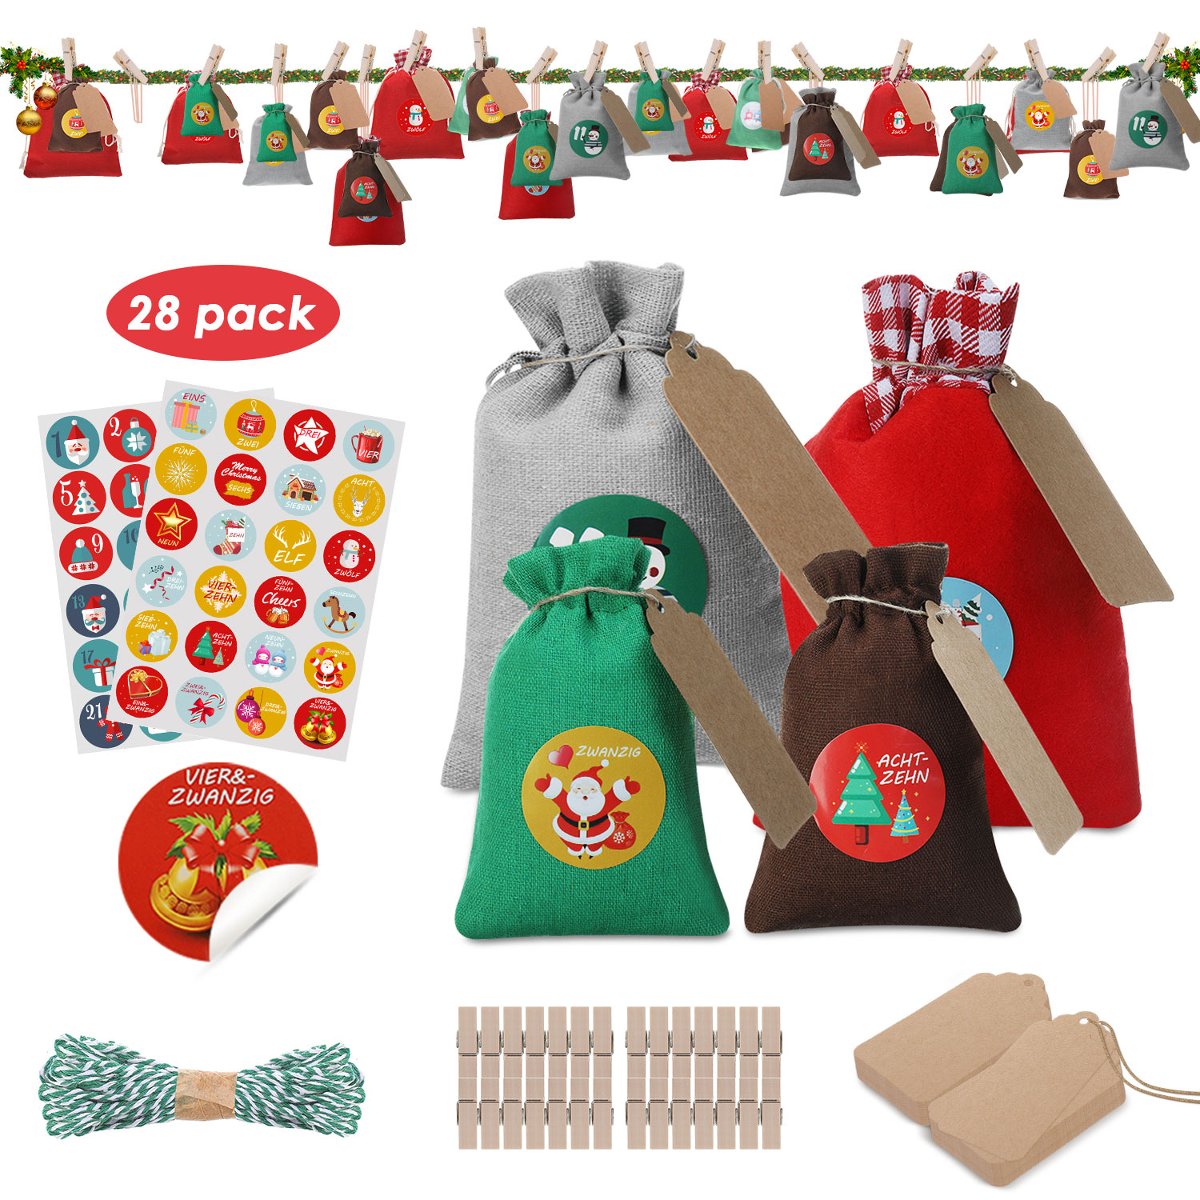 JOYXEON-28PCS-Christmas-Hanging-Advent-Calendars-Countdown-Drawstring-Gift-Bags-Candy-Biscuit-Pouche-1896442-4